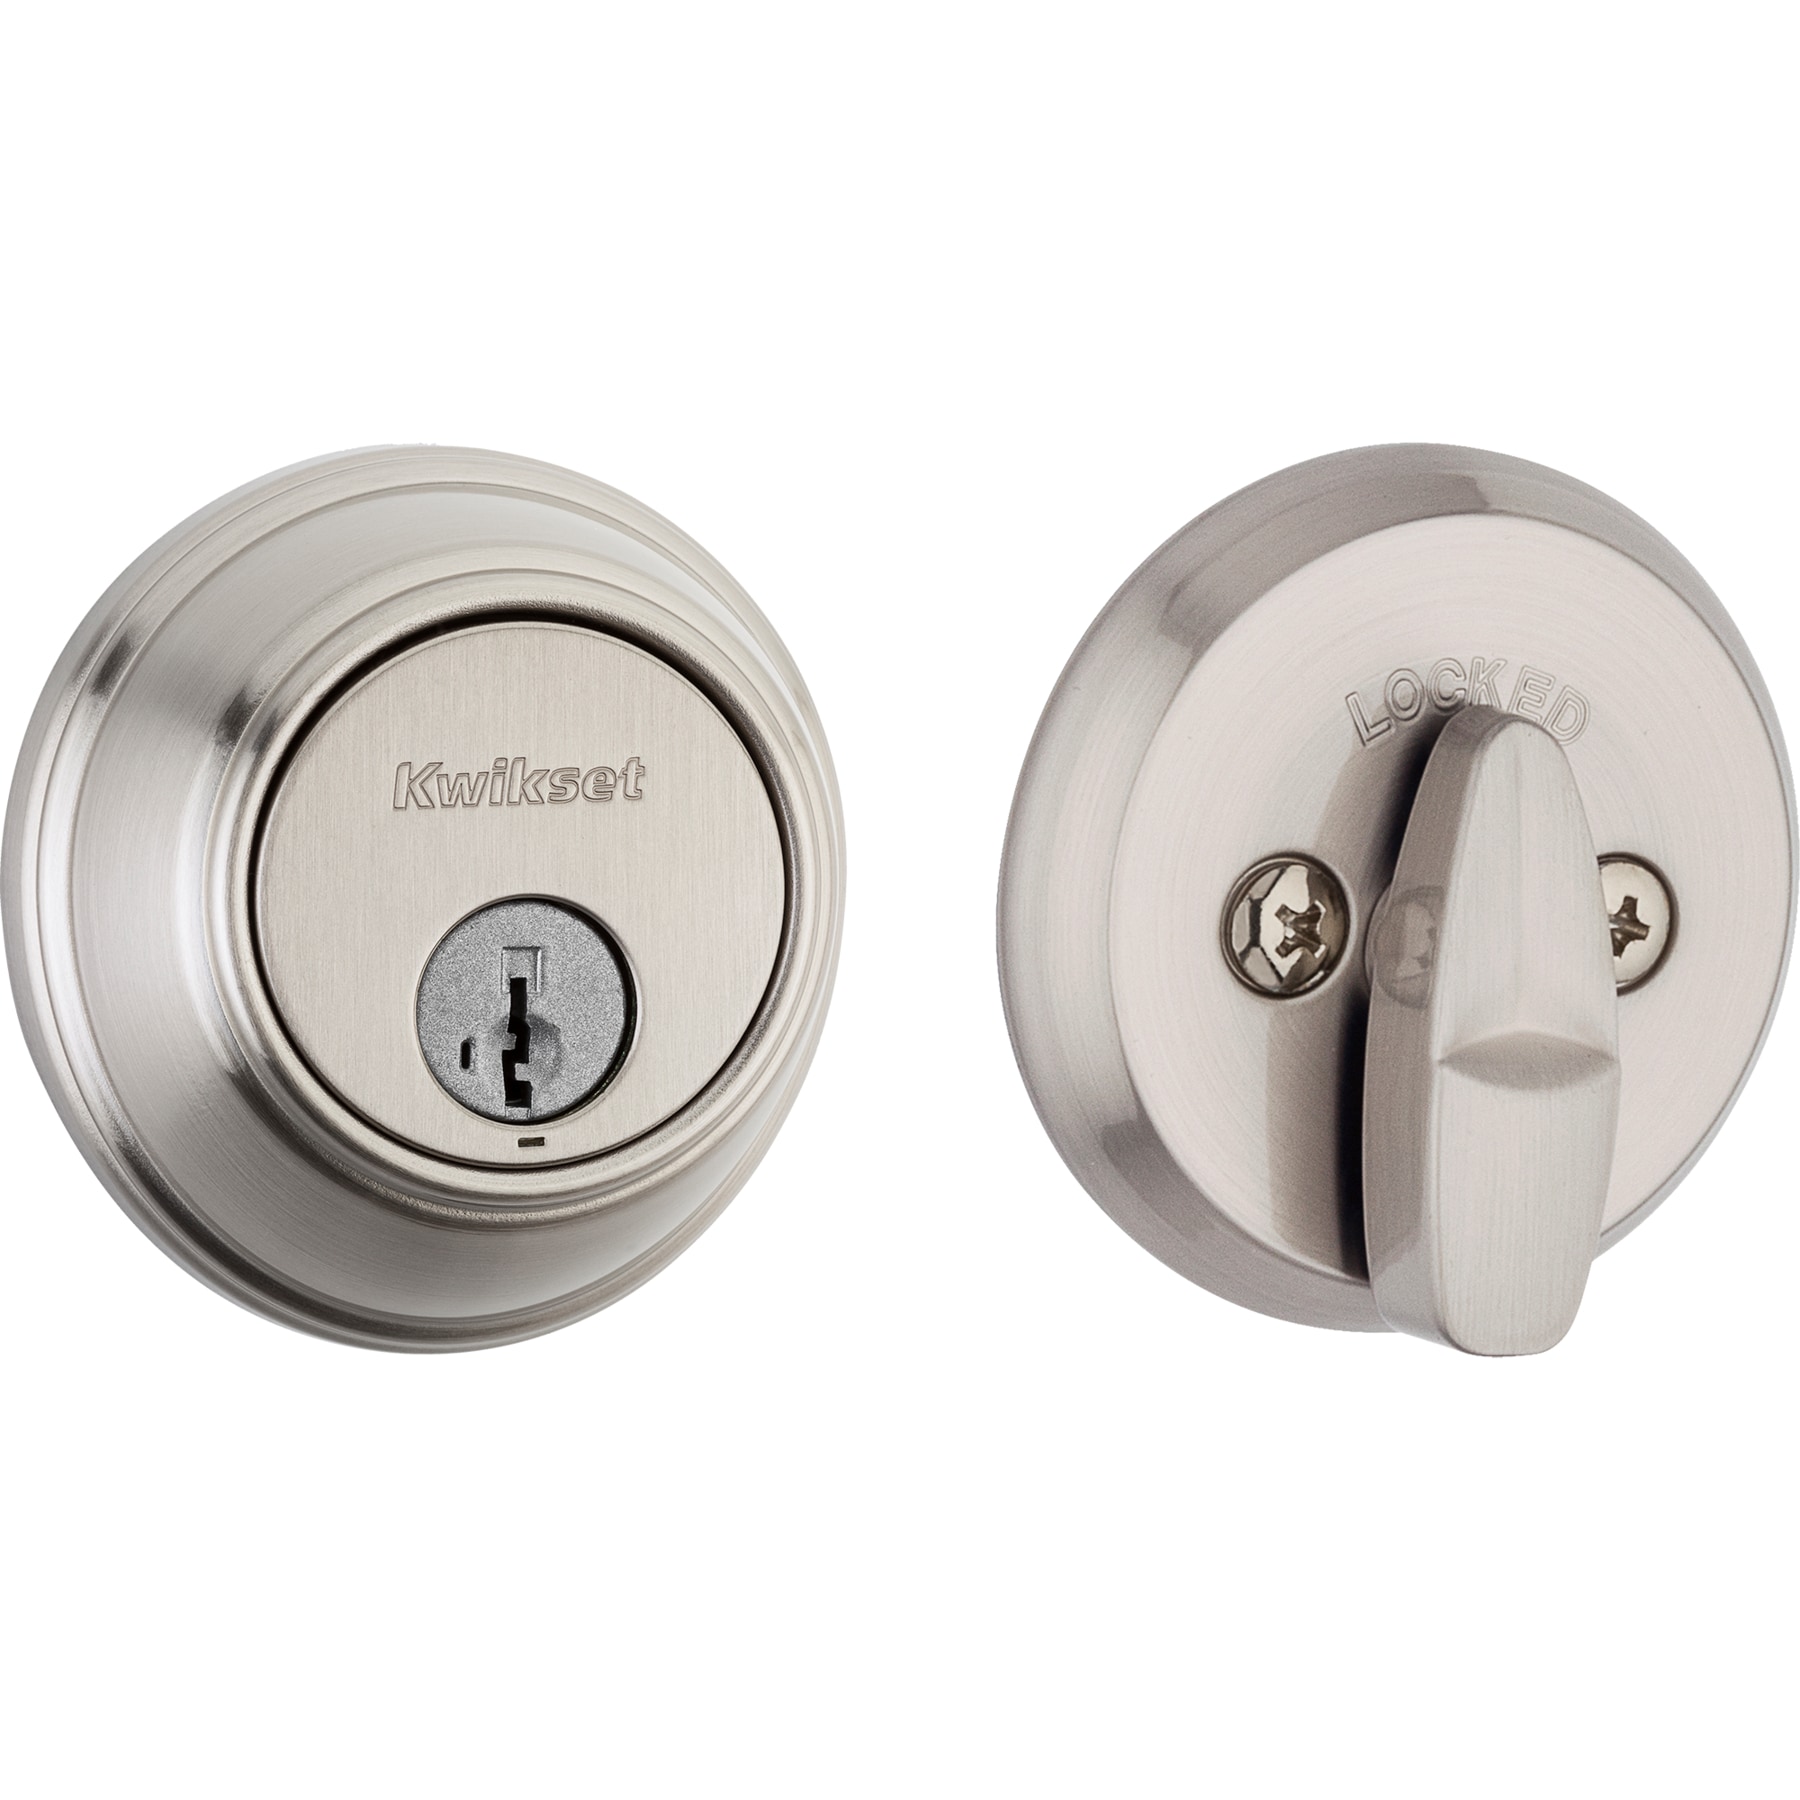 Kwikset Security 816 KeyControl Satin Nickel Key Control Deadbolt with  SmartKey in the Deadbolts department at